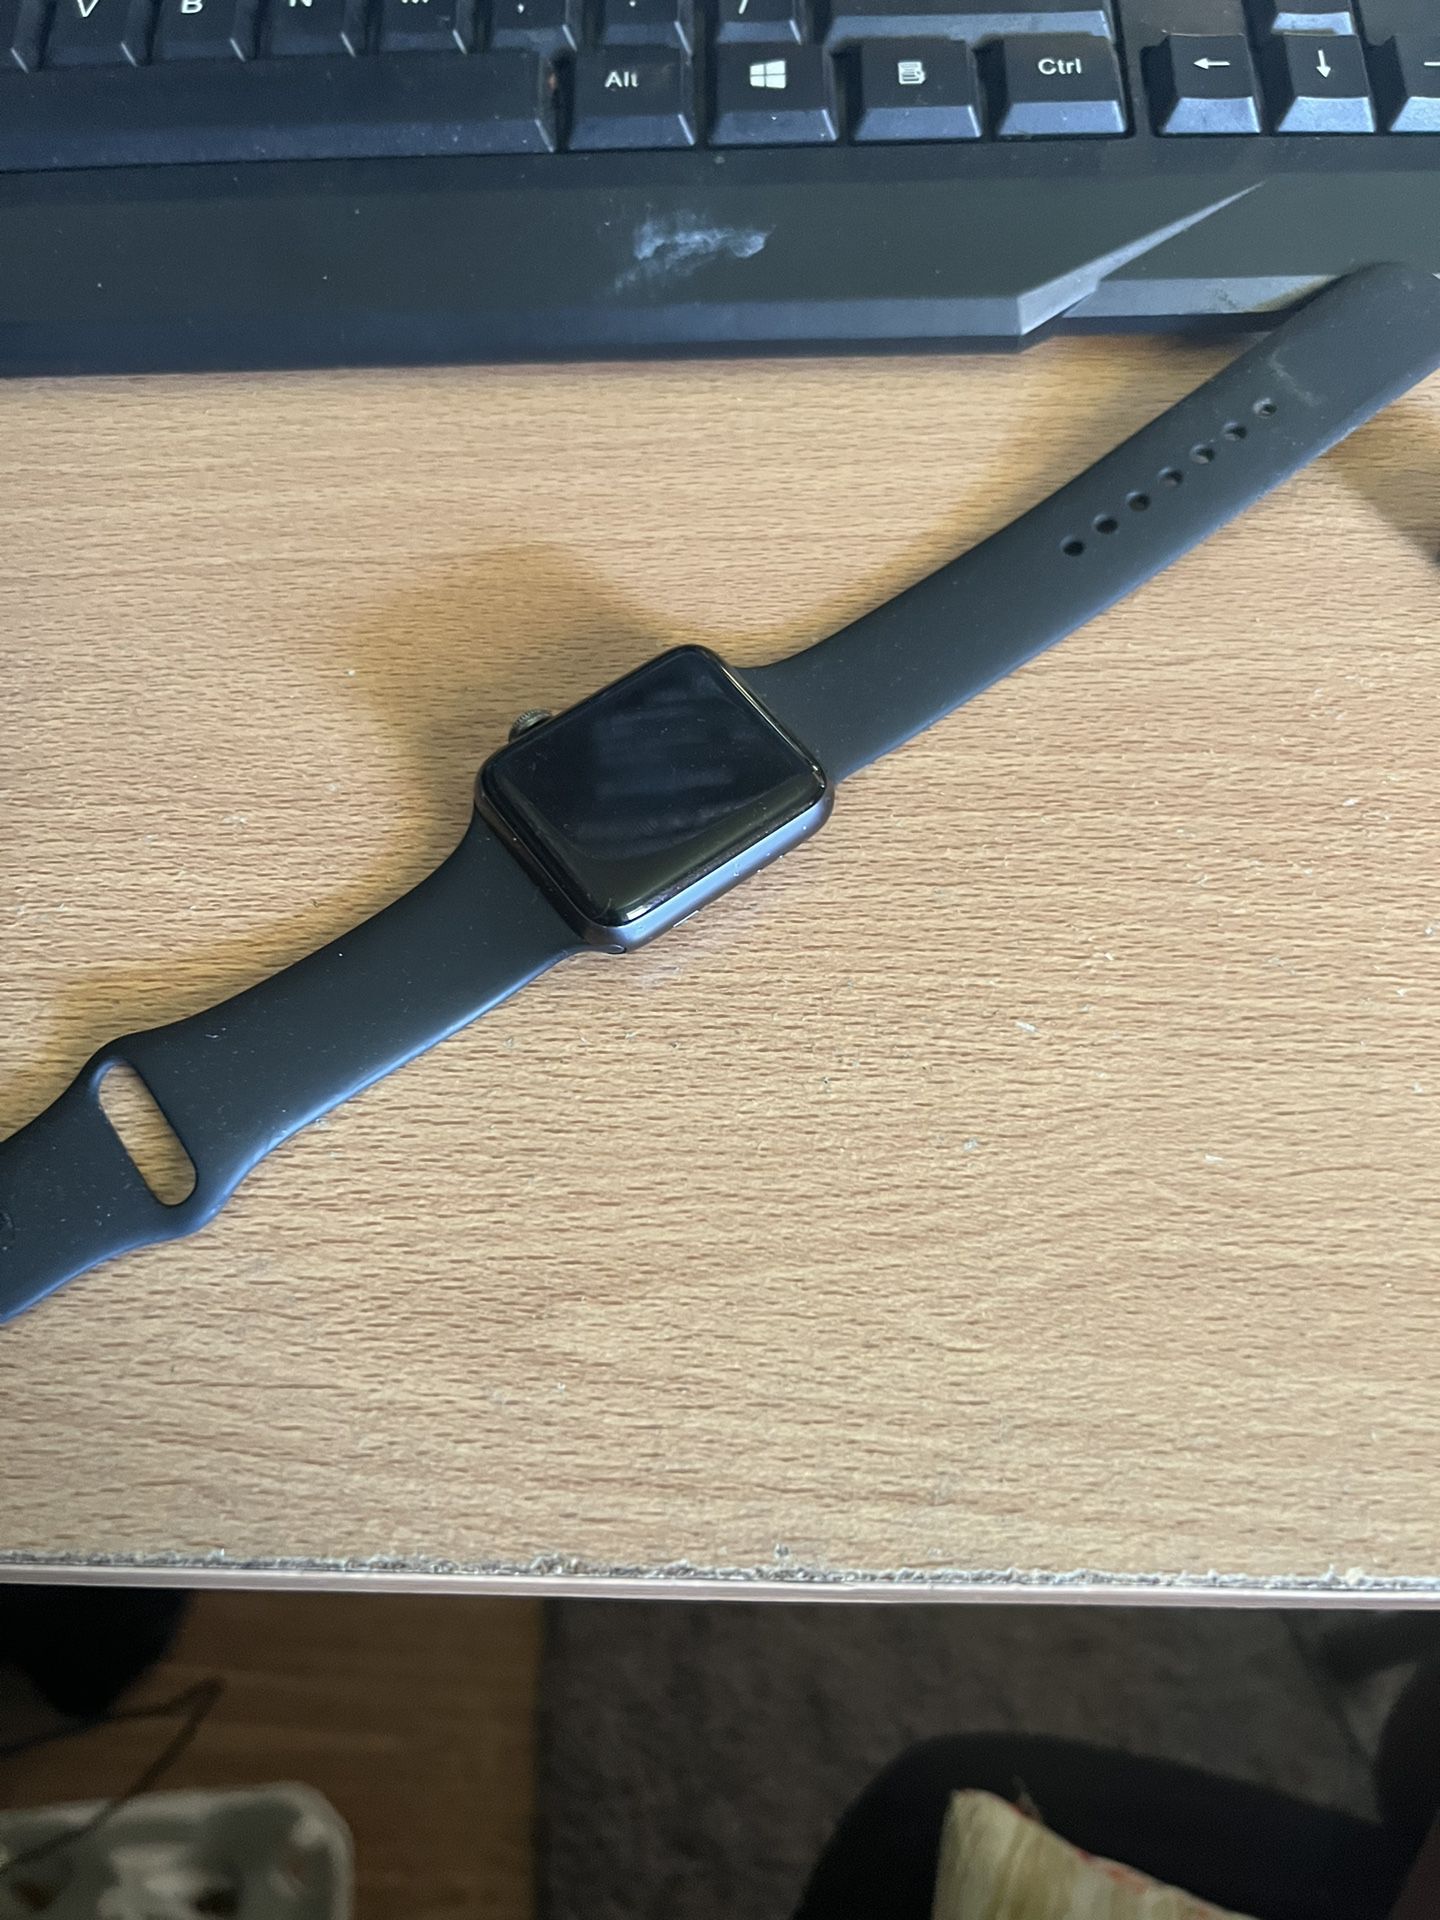 Apple Watch Series 3(Text,Call,& GPS) $250 OBO 